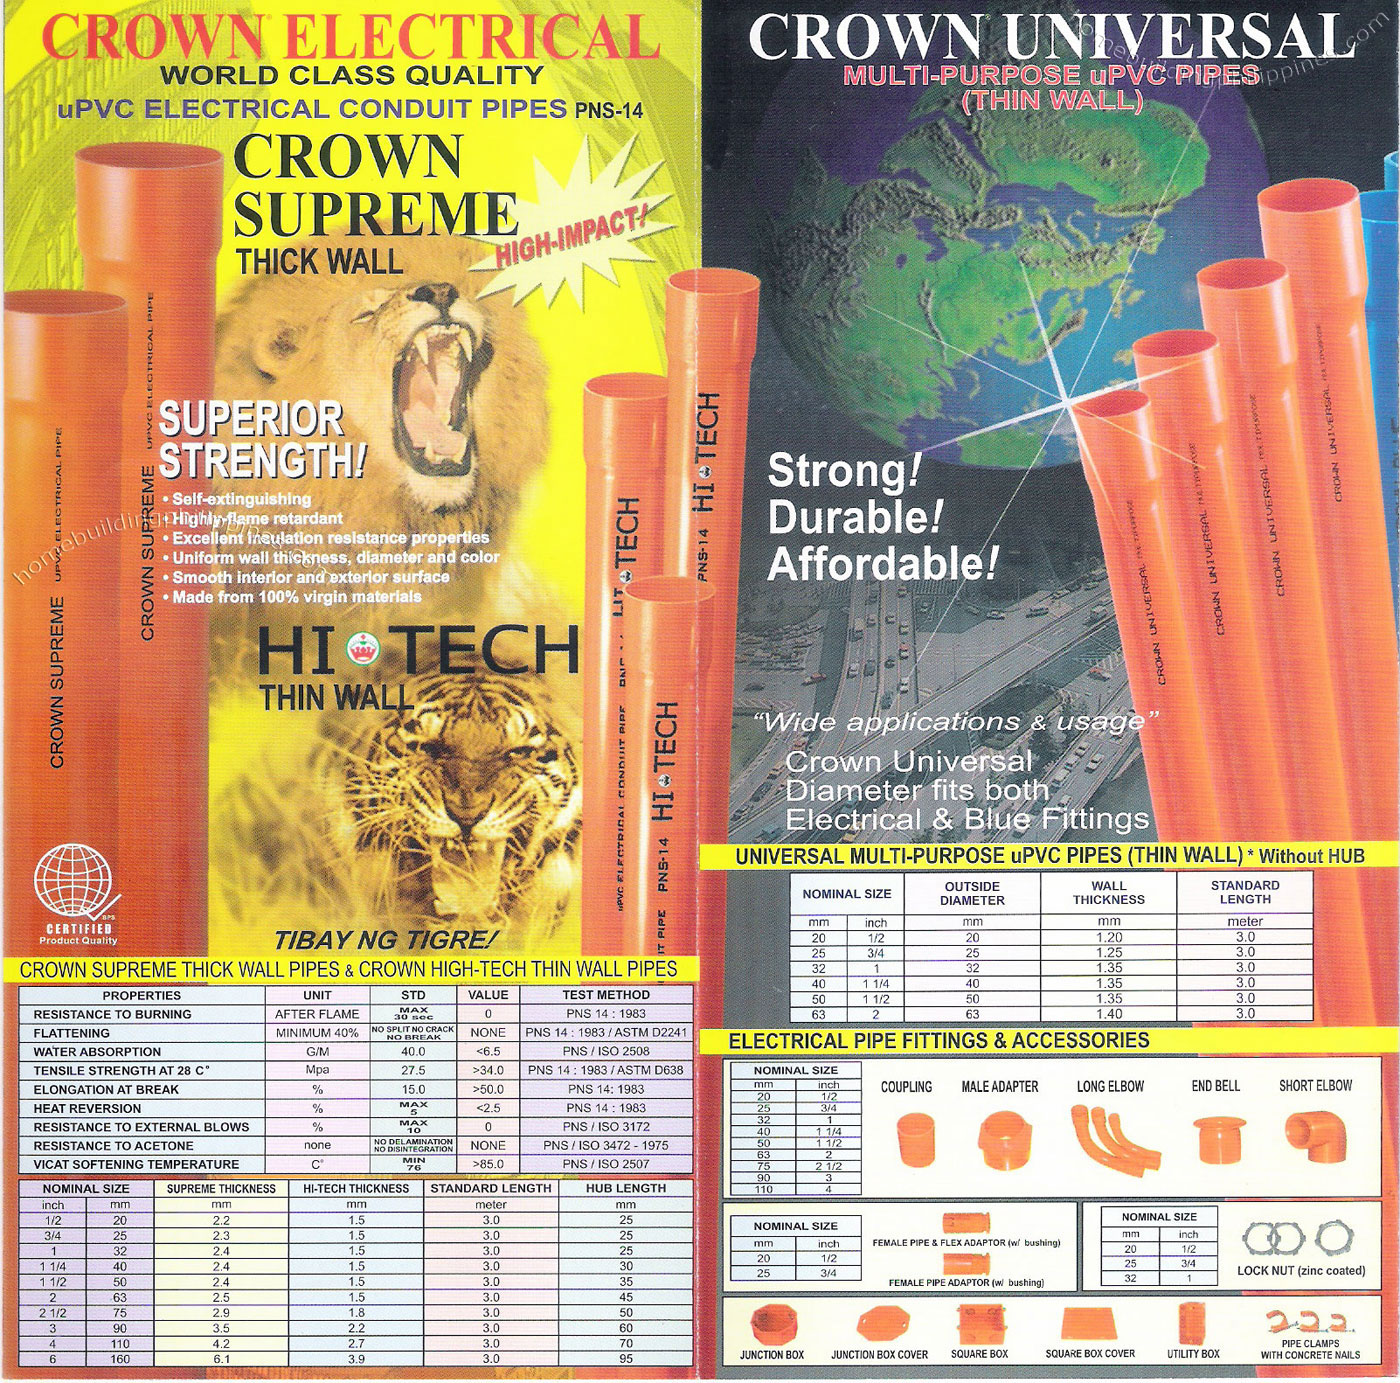 Crown Supreme uPVC Electrical Conduit Pipes Thick Wall Crown Universal Multi Purpose uPVC Pipes Thin Wall Strong Durable Affordable